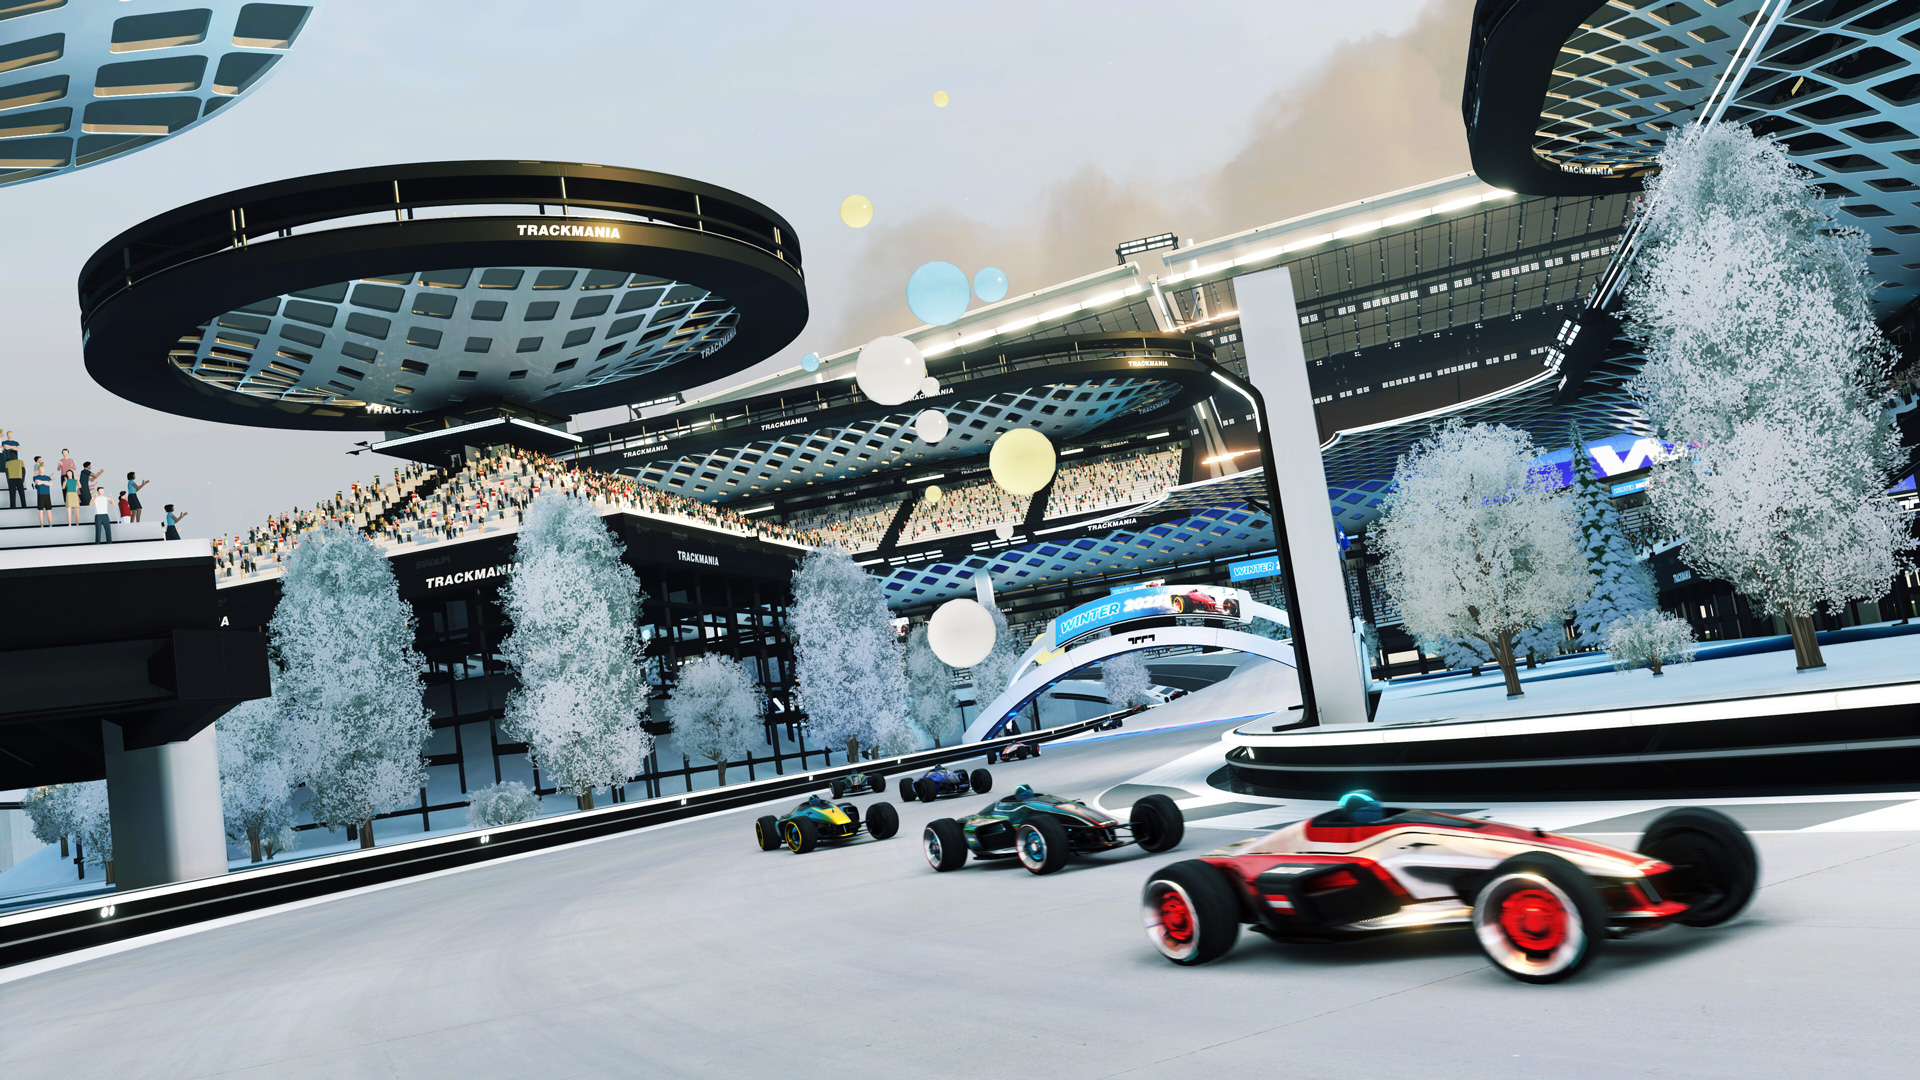 Let the show begin with many new Trackmania blocks and items